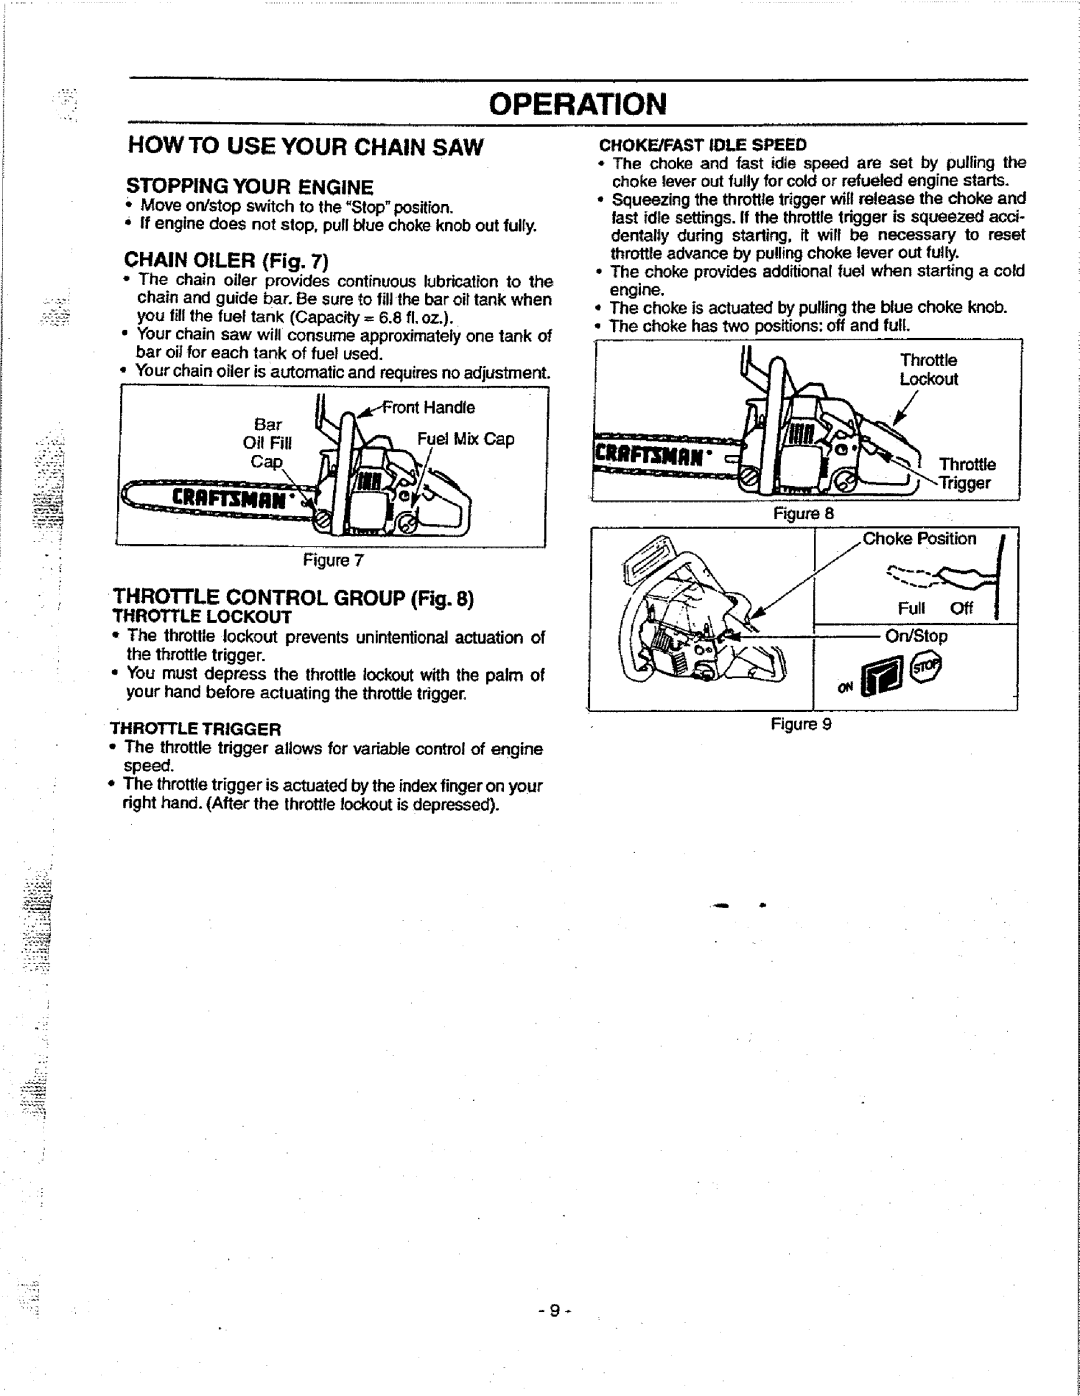 Craftsman 358.351080 manual Howto Use Your Chain Saw, CHAIN OILER Fig, THROnLE CONTROL GROUP Fig, Operation 